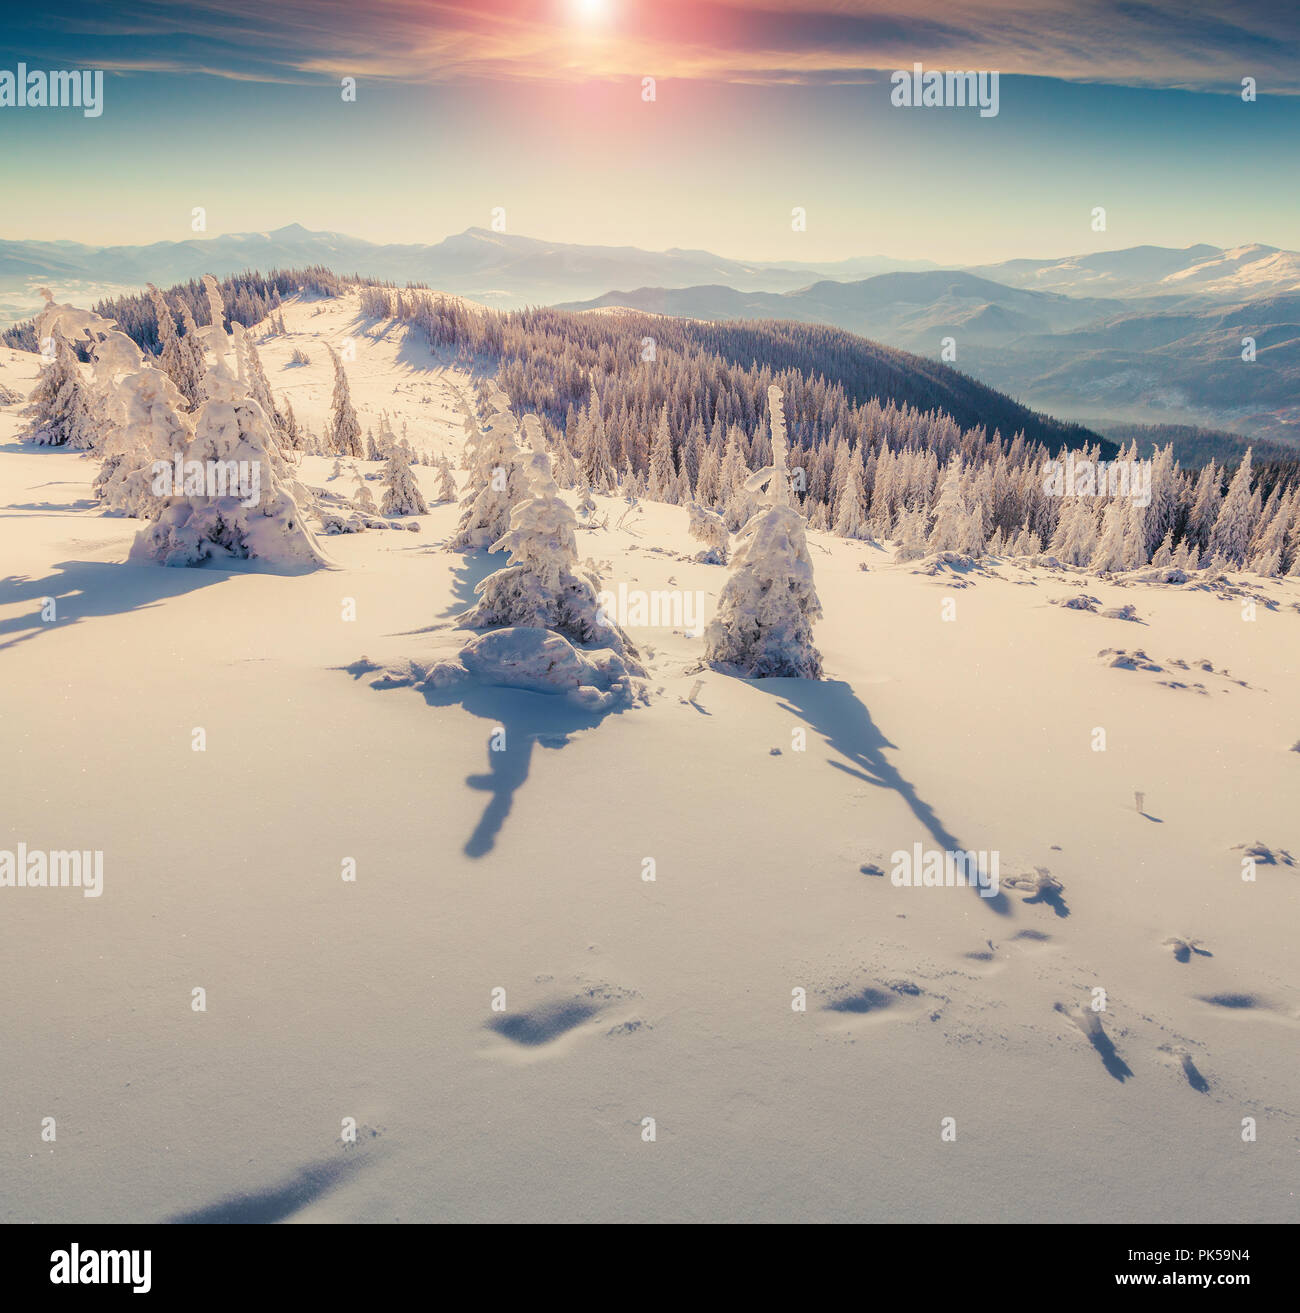 Colorful winter scene in the snowy mountains. Fresh snow at frosty morning glowing first sunlight. Instagram toning. Stock Photo